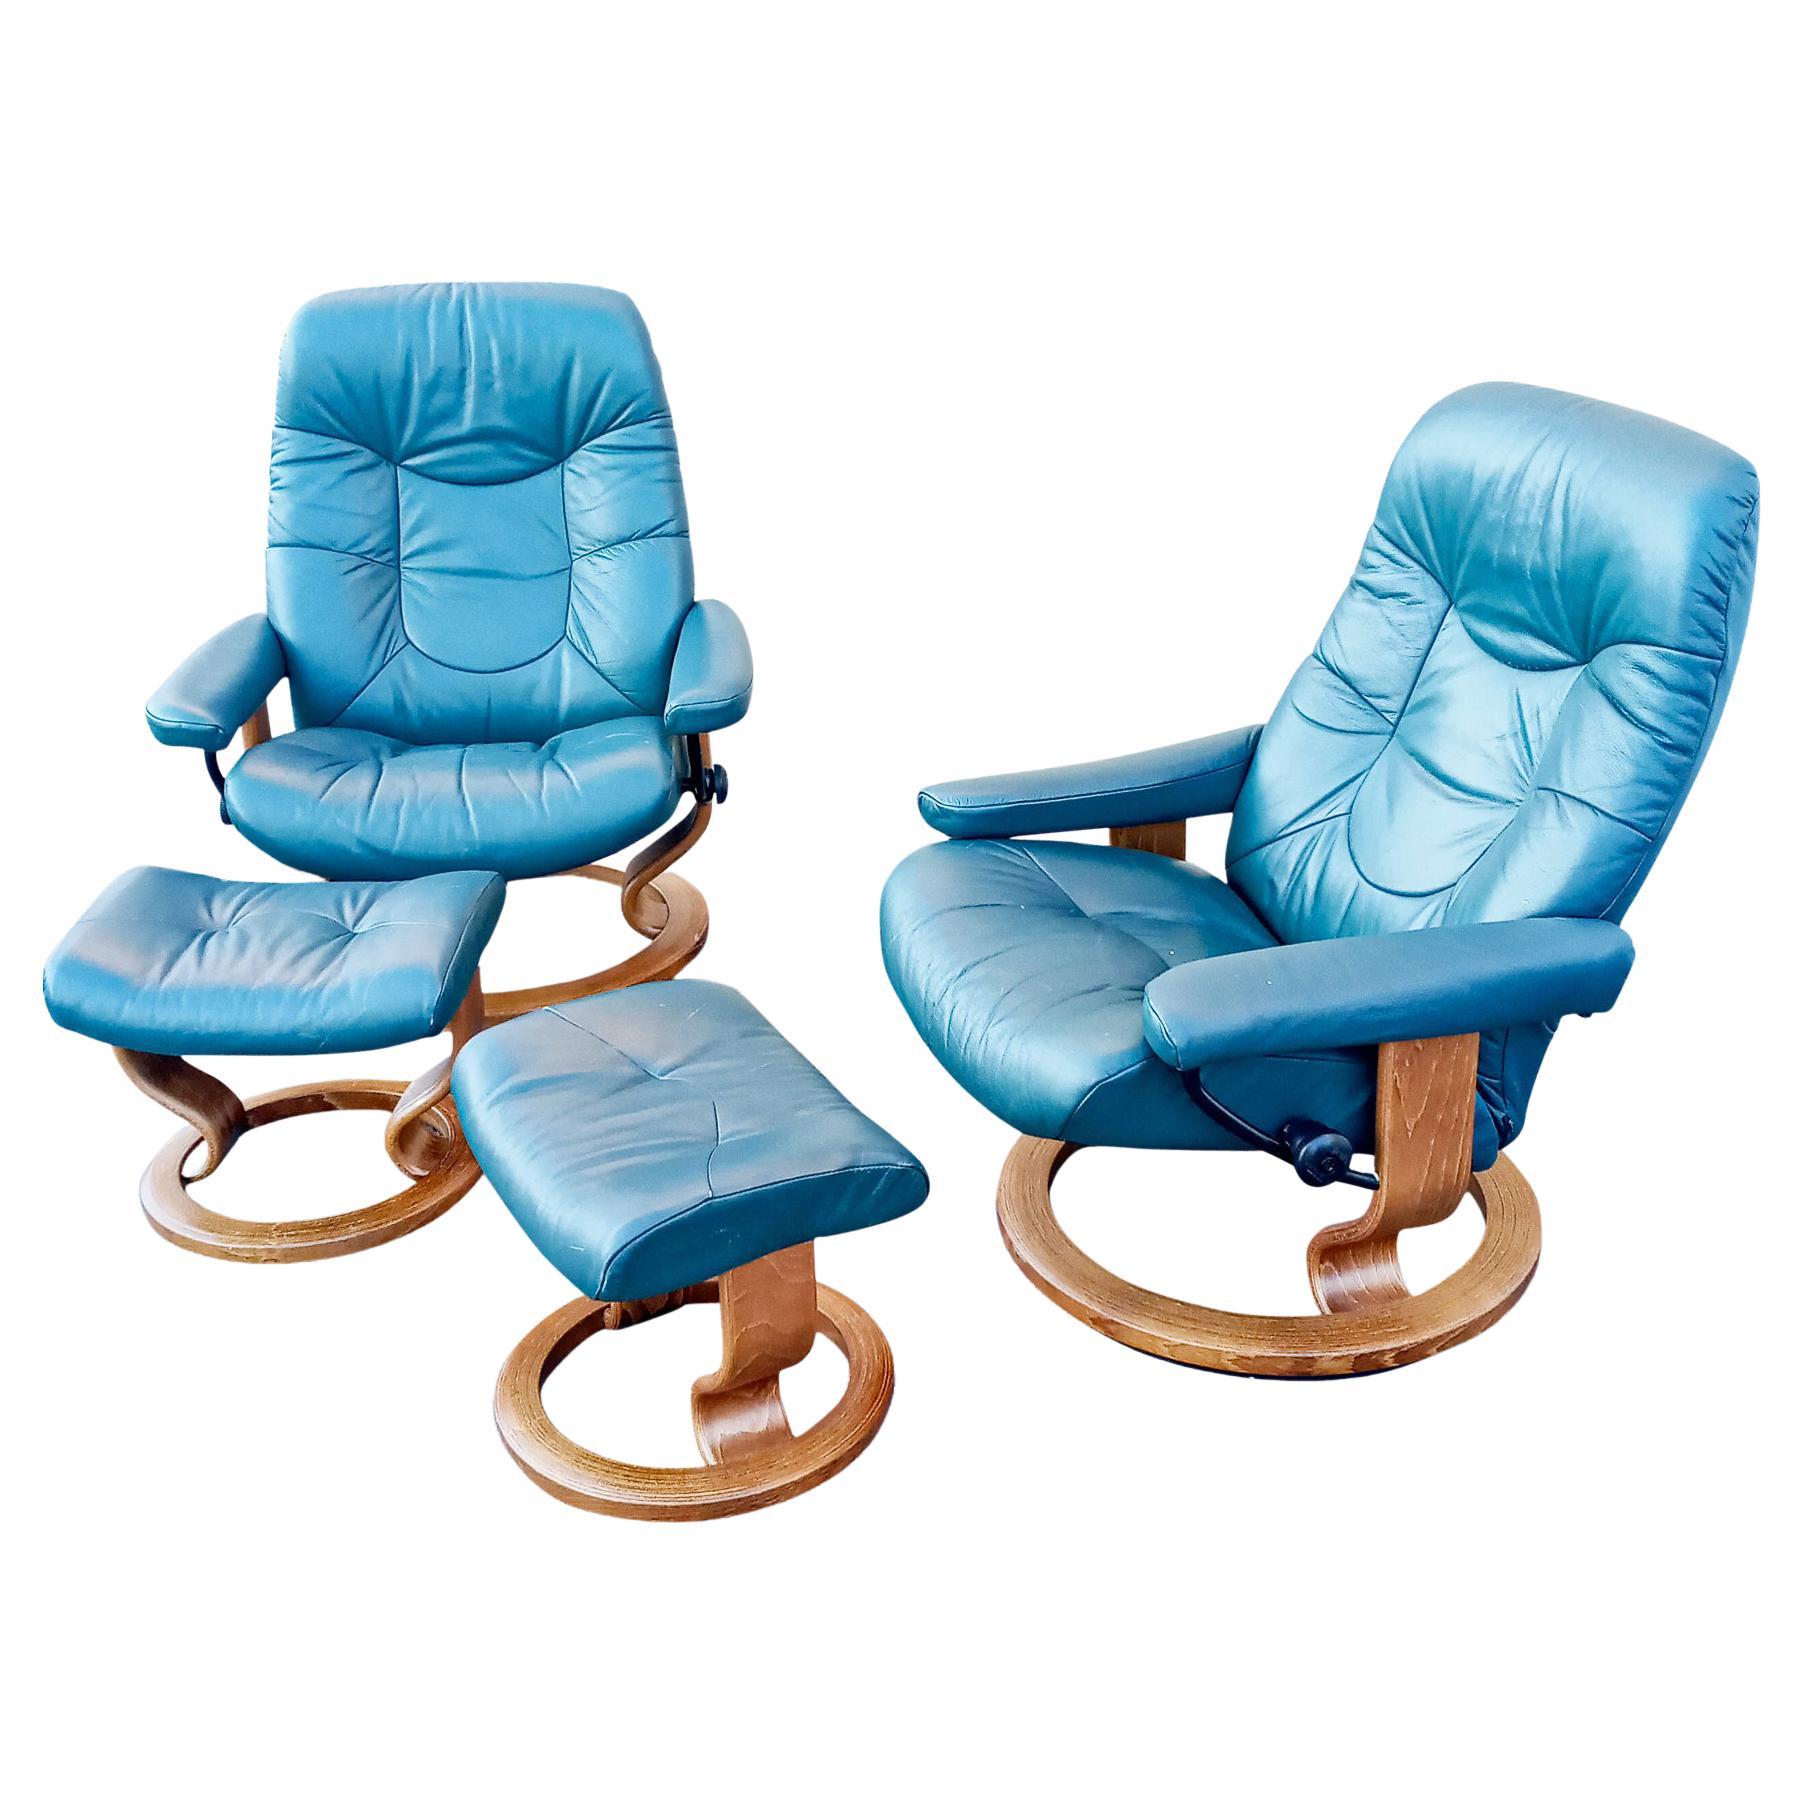 A Scandinavian style pair of recliners and ottomans by Ekornes, their Stressless brand. With teak wood and metal frames and genuine leather upholstery, these comfortable green/teal (not blue) color leather recliners on a round teak wood bases that